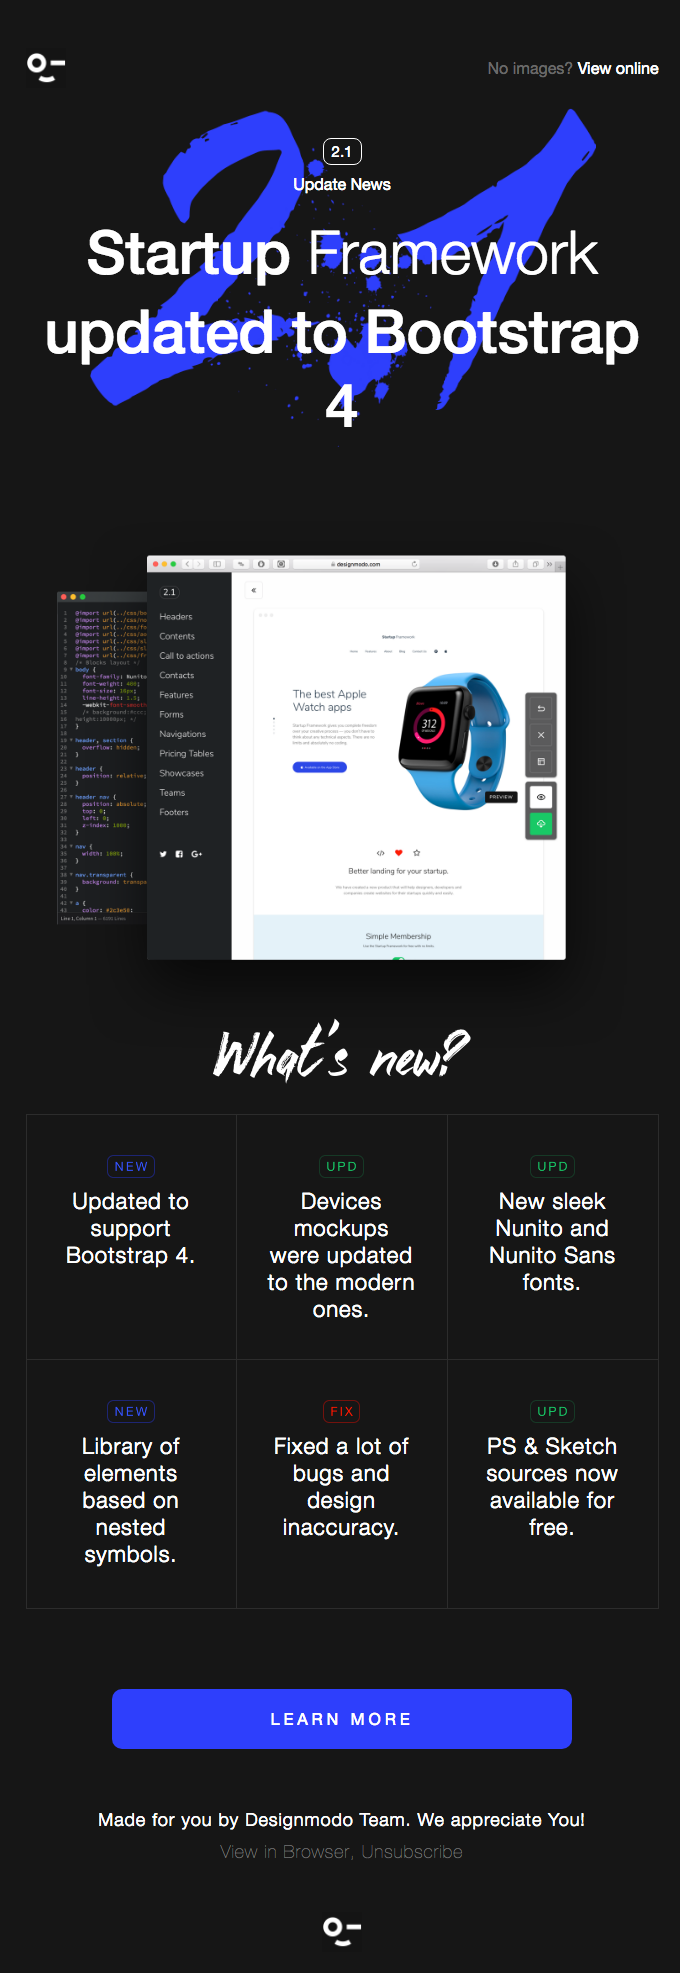 Startup Framework 2 Updated to Bootstrap 4, and more… - Designmodo Email Newsletter